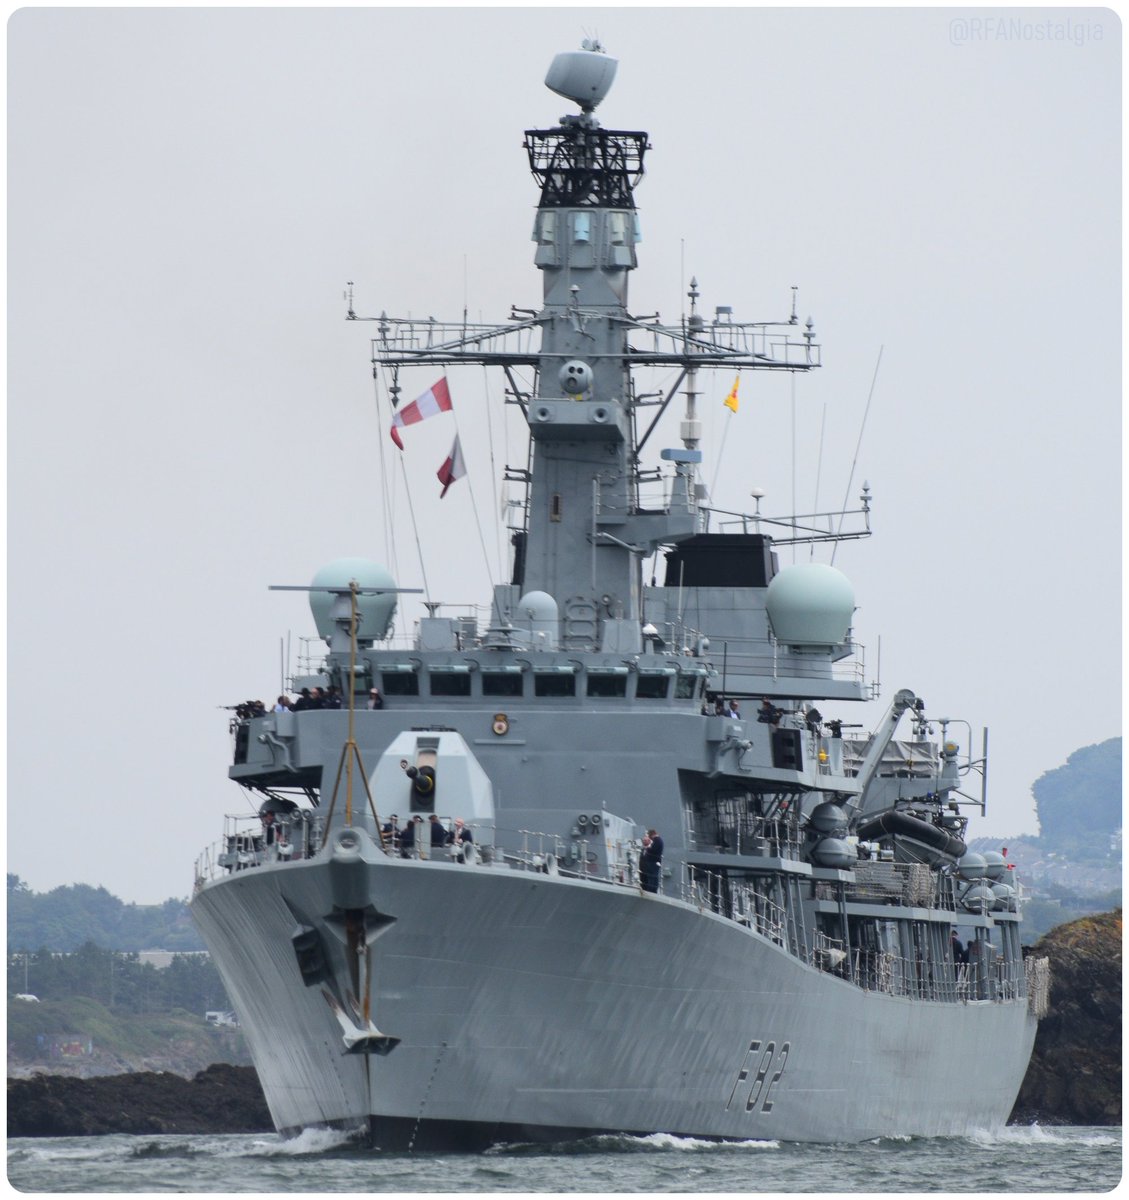 No @RFAHeadquarters vessels about today but @RoyalNavy @HMSSomerset out / back proudly displaying the Somerset county flag - > hosting 'Affiliates Day' from @HMNBDevonport